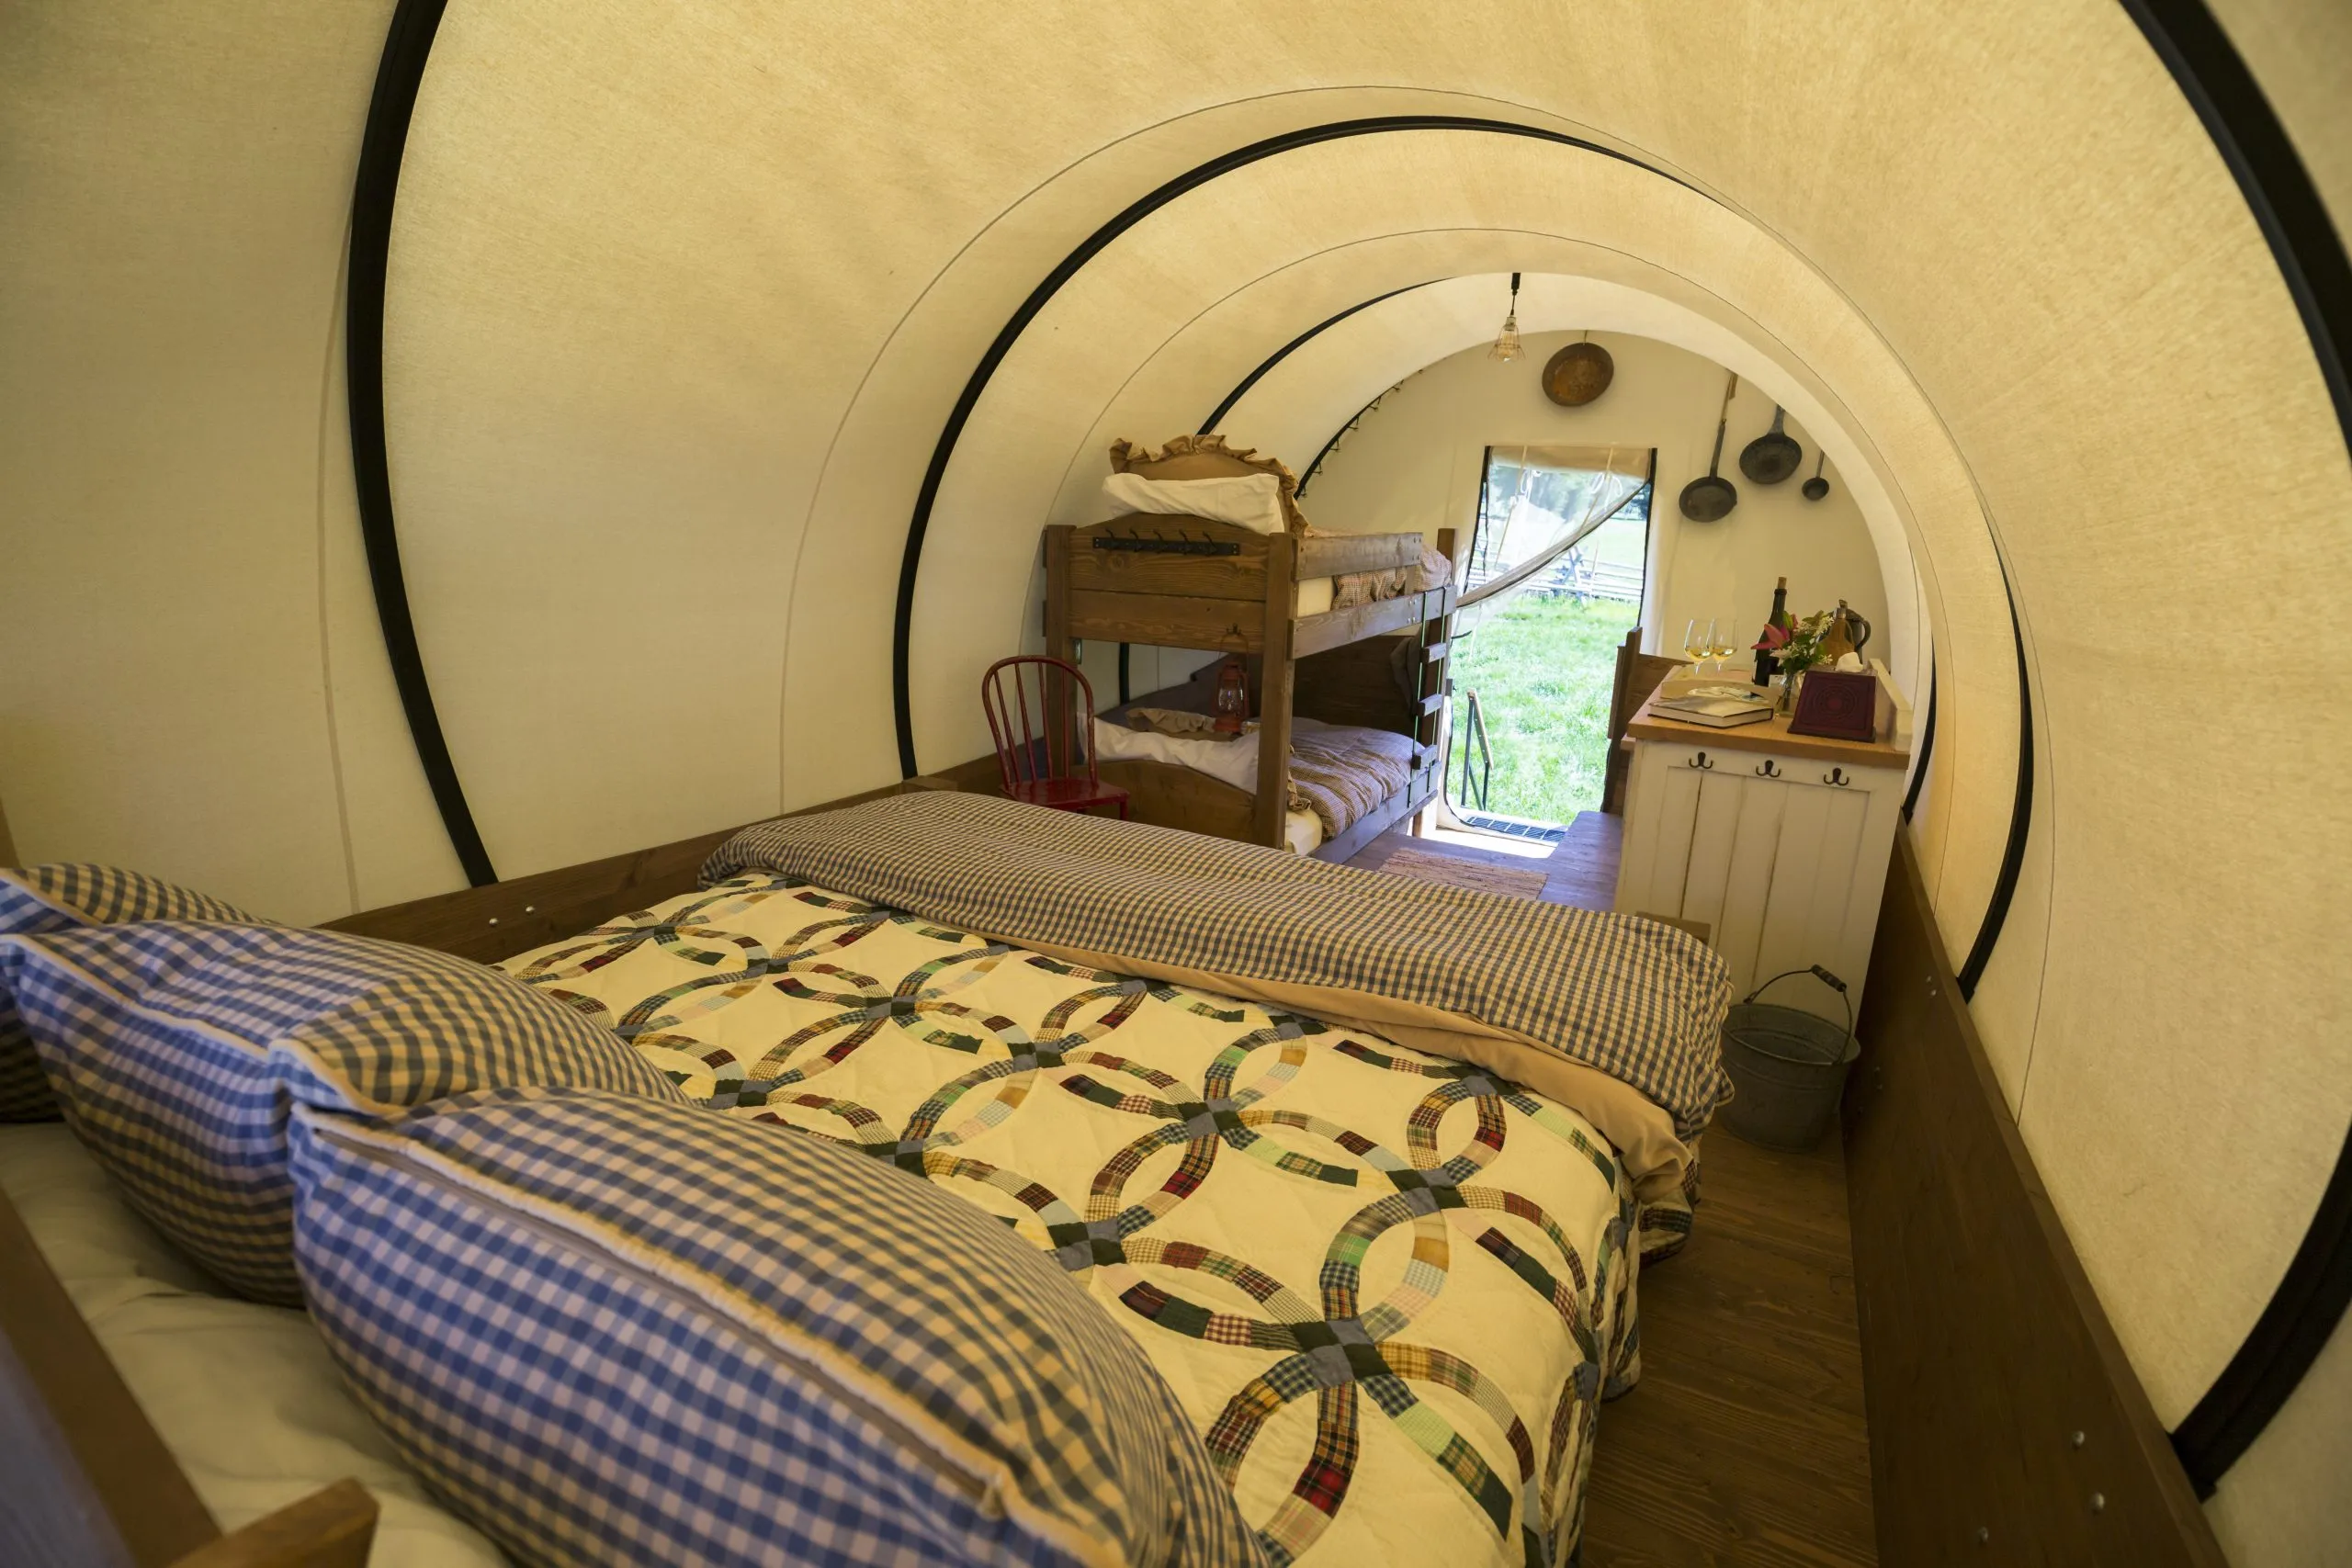 Interior of a covered wagon room looking towards the open entrance from the bed's point of view